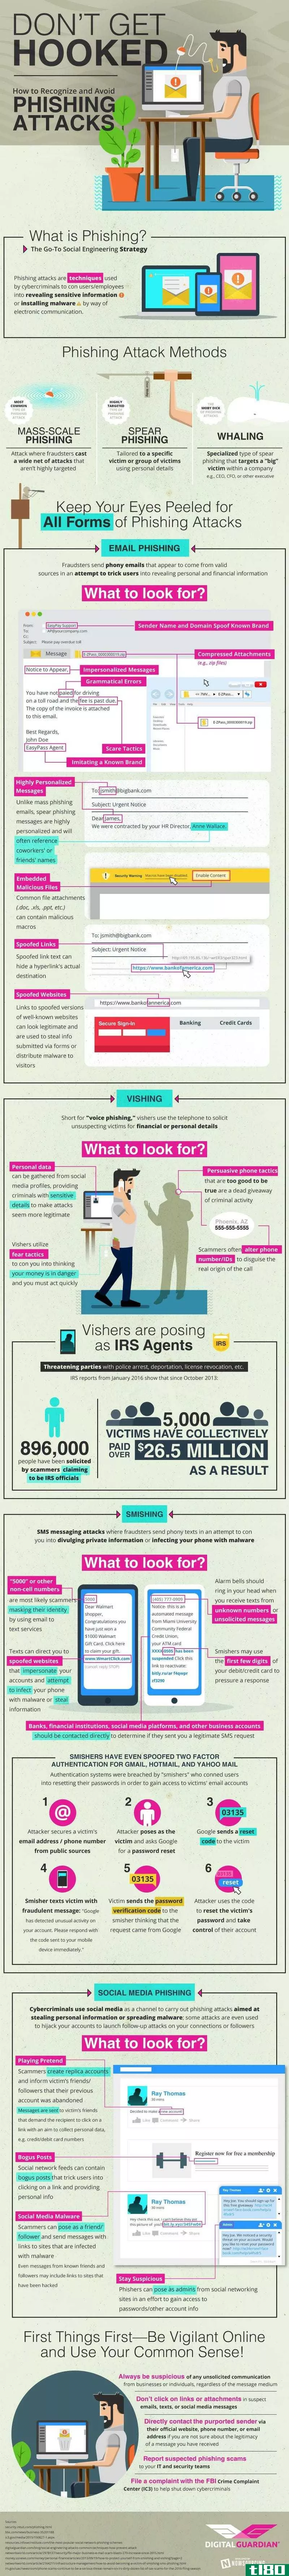 Illustration for article titled This Infographic Shows the Common Ways Scammers Try to Phish Your Account